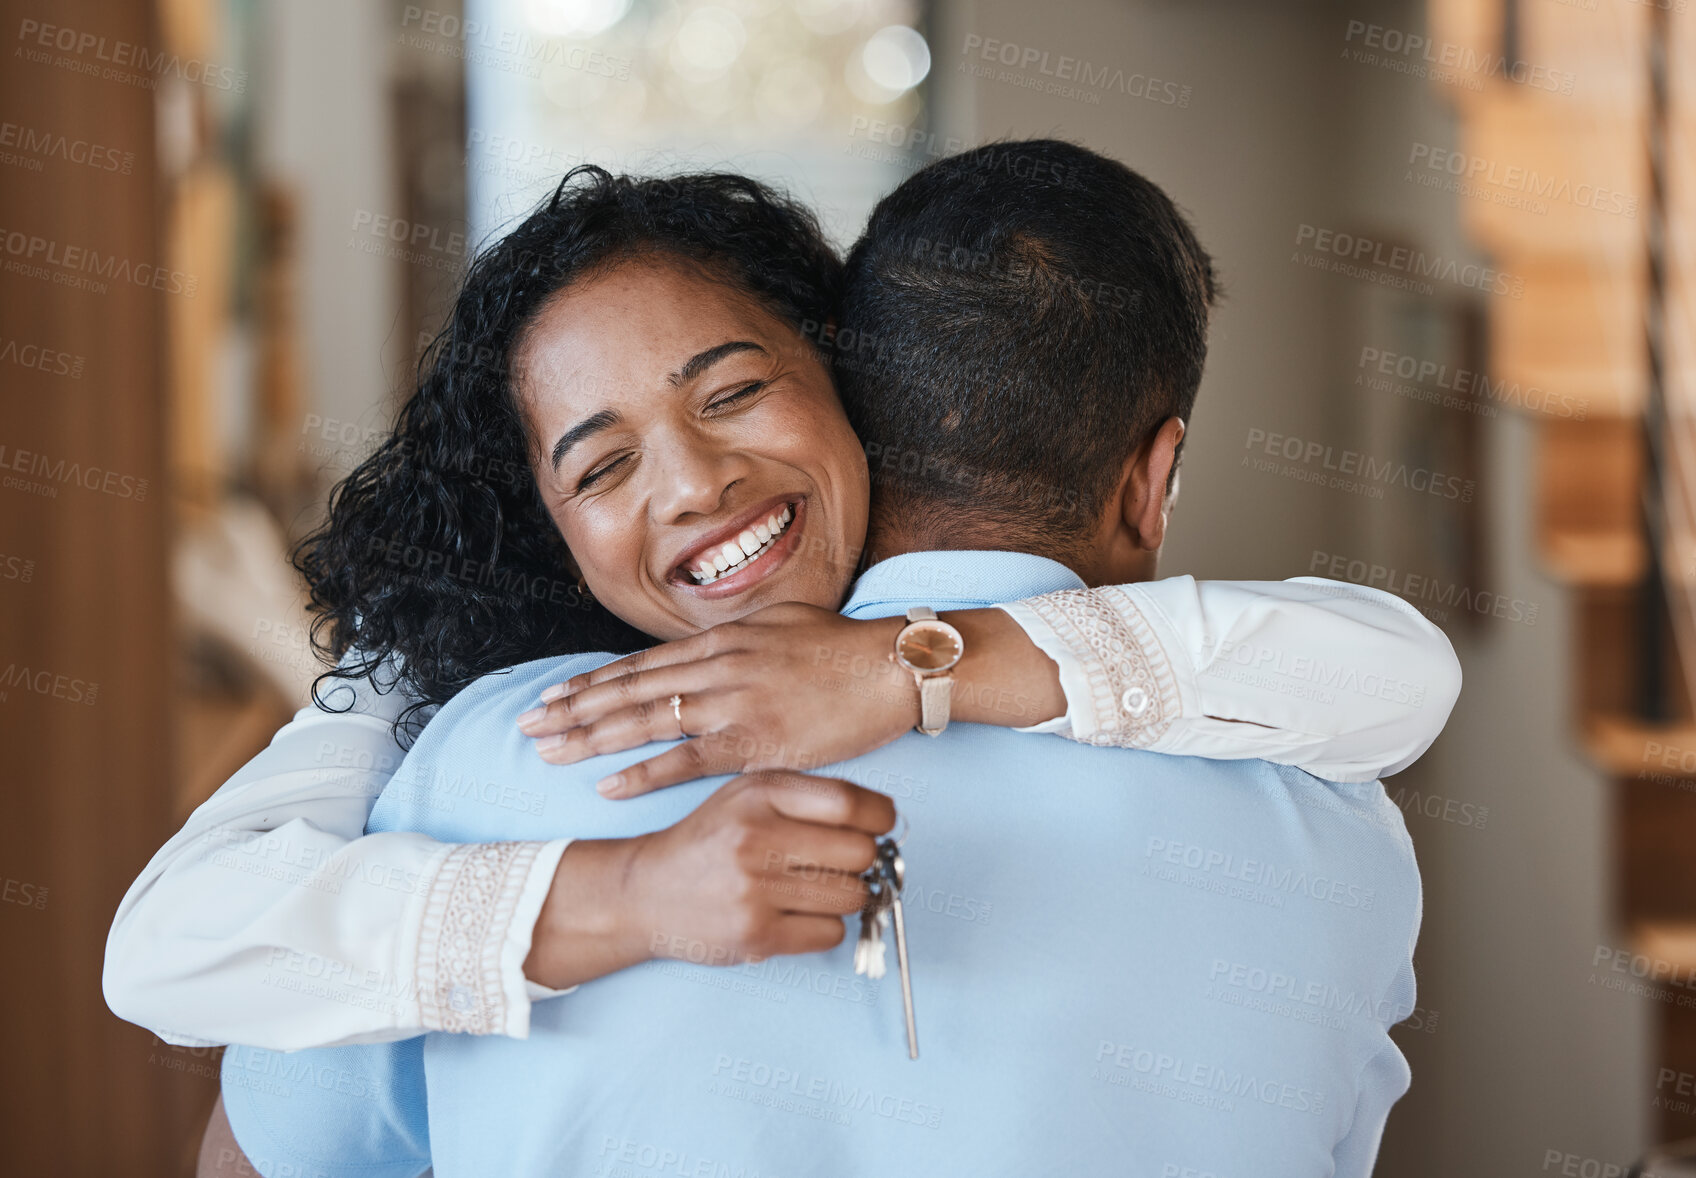 Buy stock photo House keys, new home or happy couple hugging for real estate, property investment or apartment success. Dream, love or Indian man embracing an excited woman to celebrate goals or moving in together